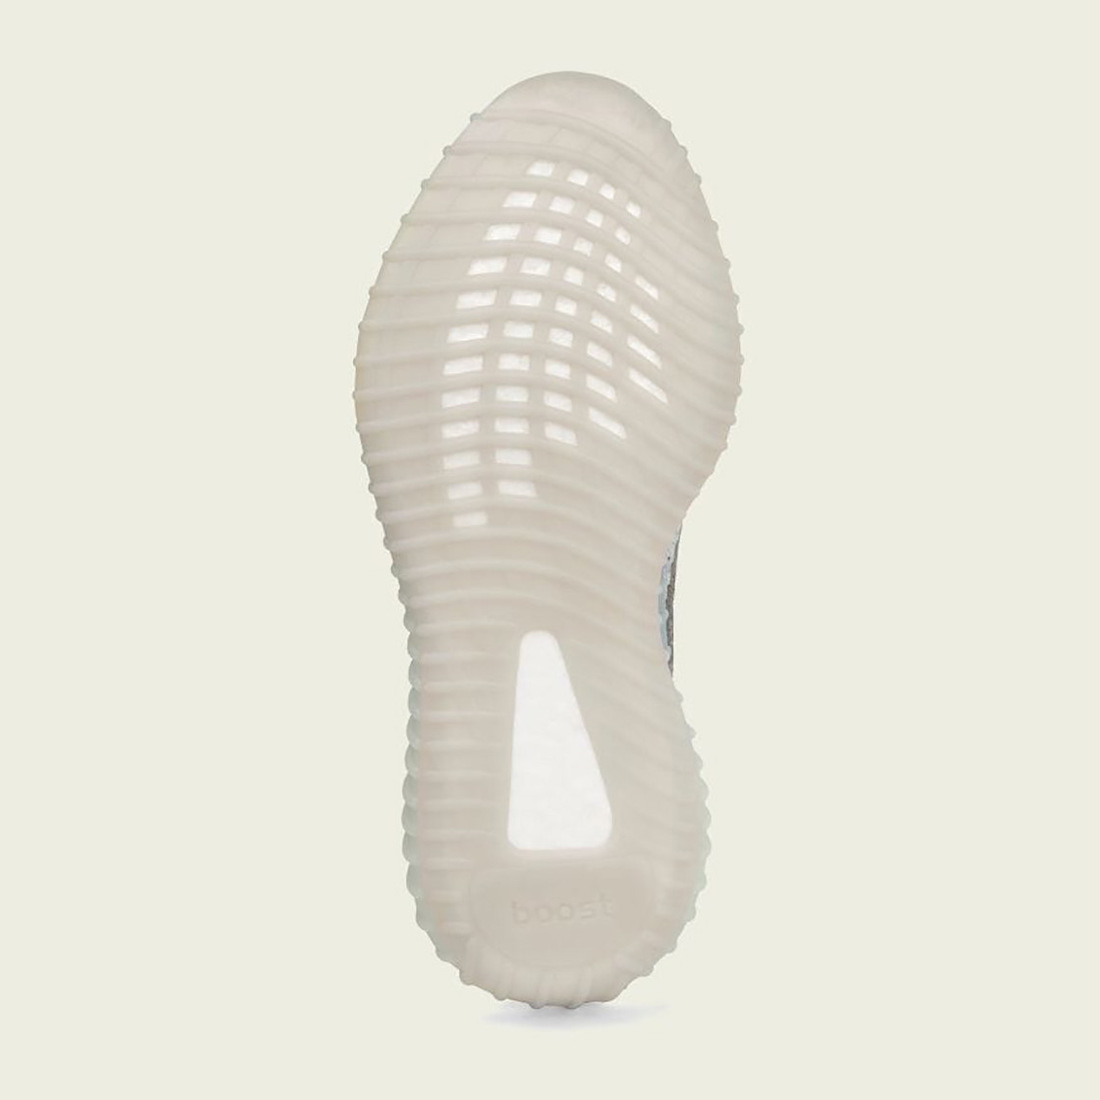 adidas Yeezy Boost 350 V2 Blue Tint Restock 2022 Release Date - SBD